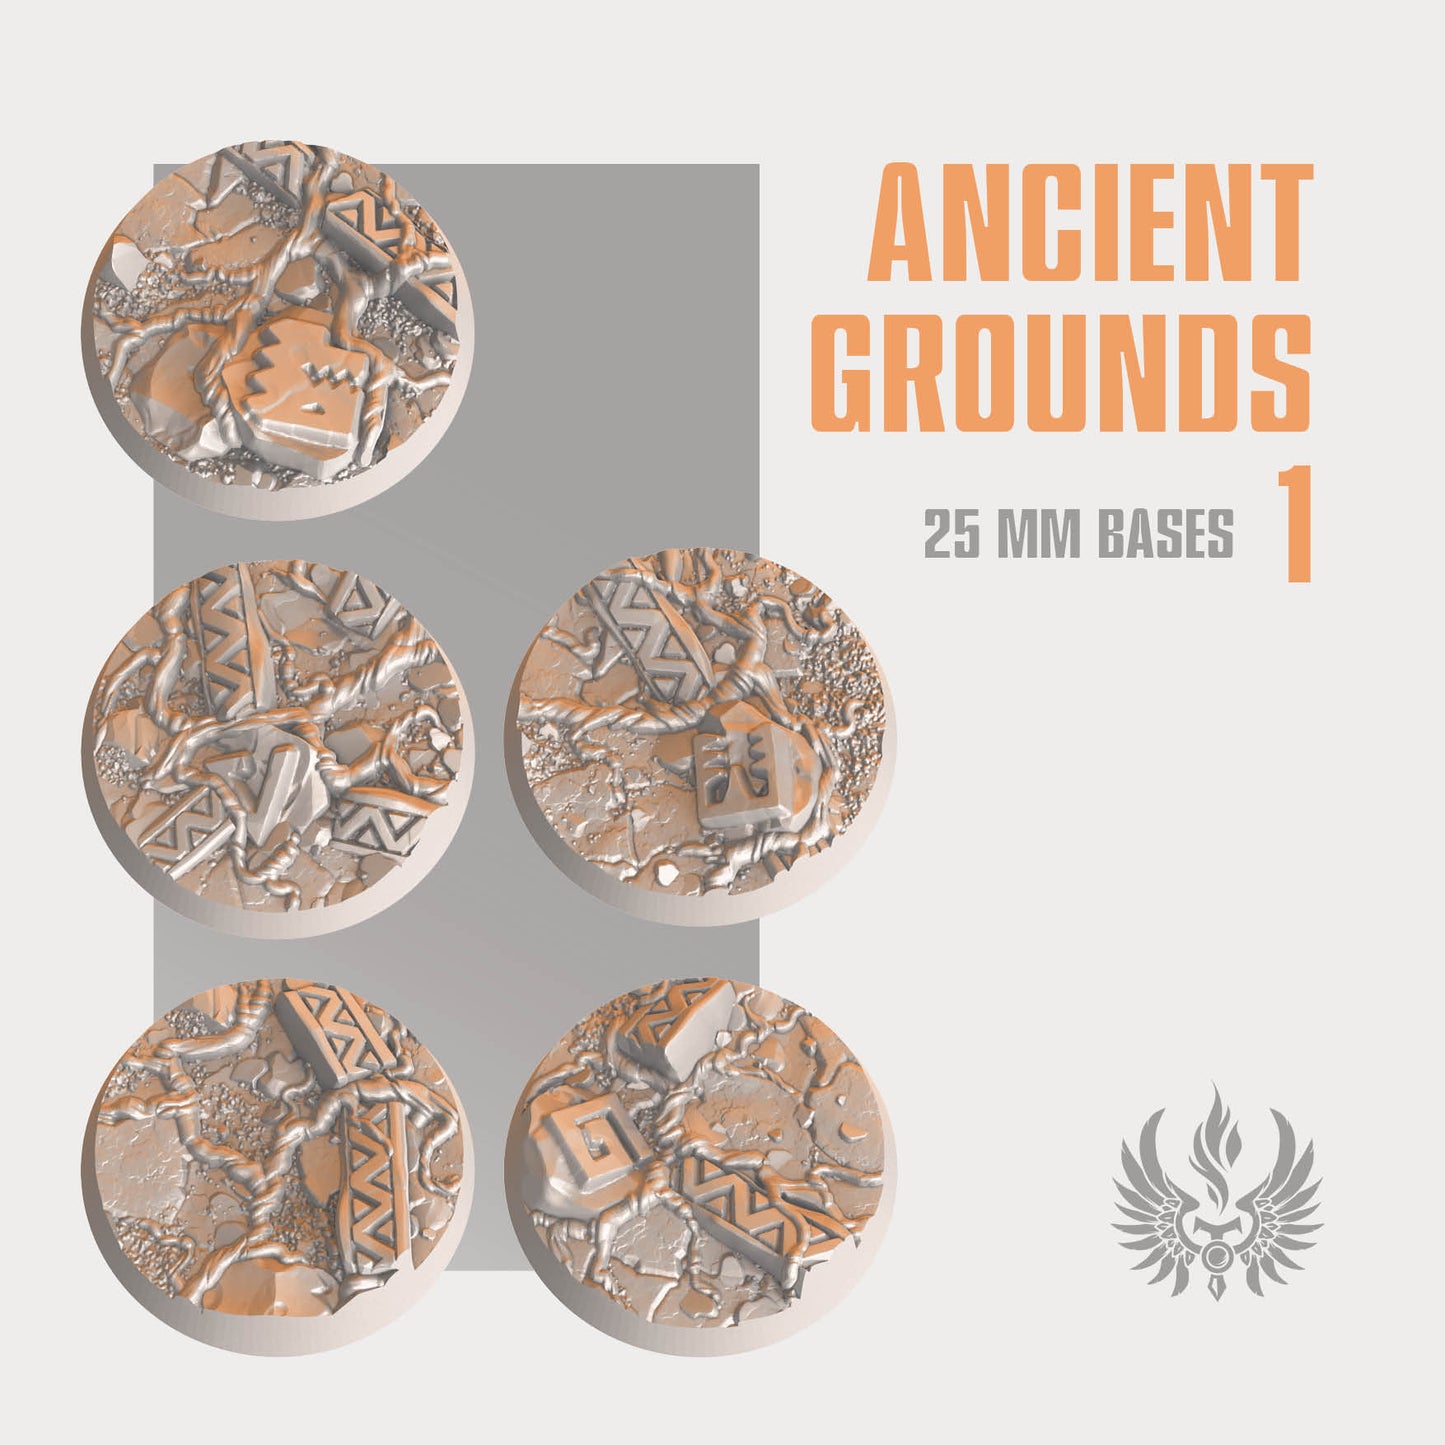 Ancient grounds bases 25 mm, set 1